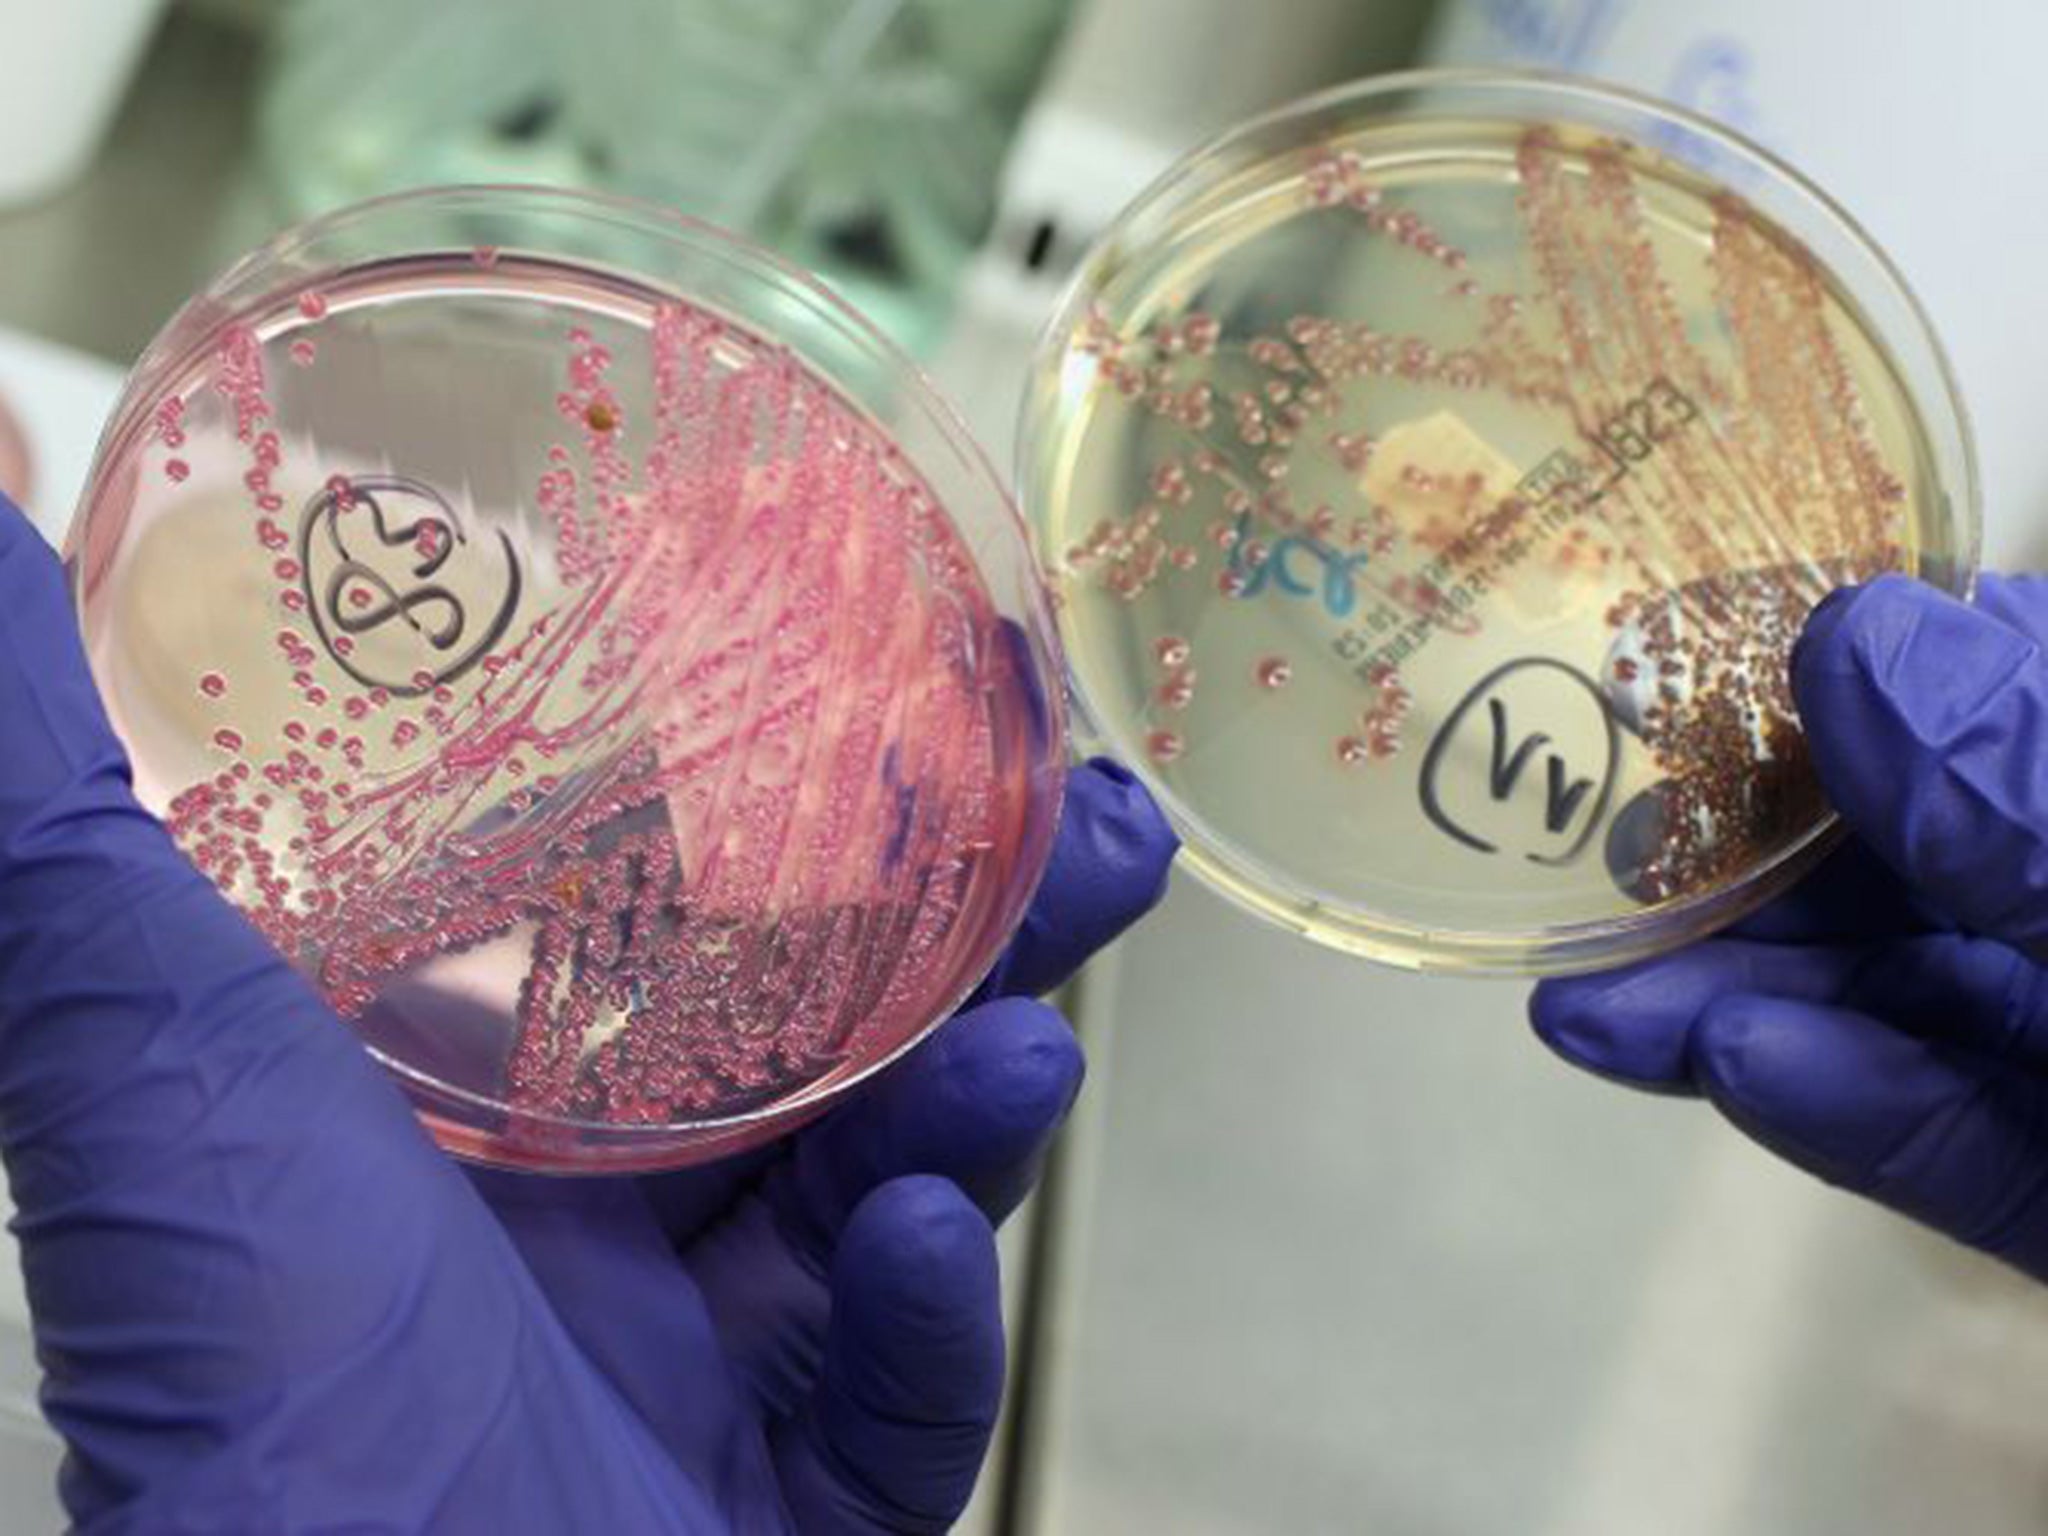 The PHE labs test samples sent by various agencies, looking for E.coli (pictured), salmonella, legionella and more